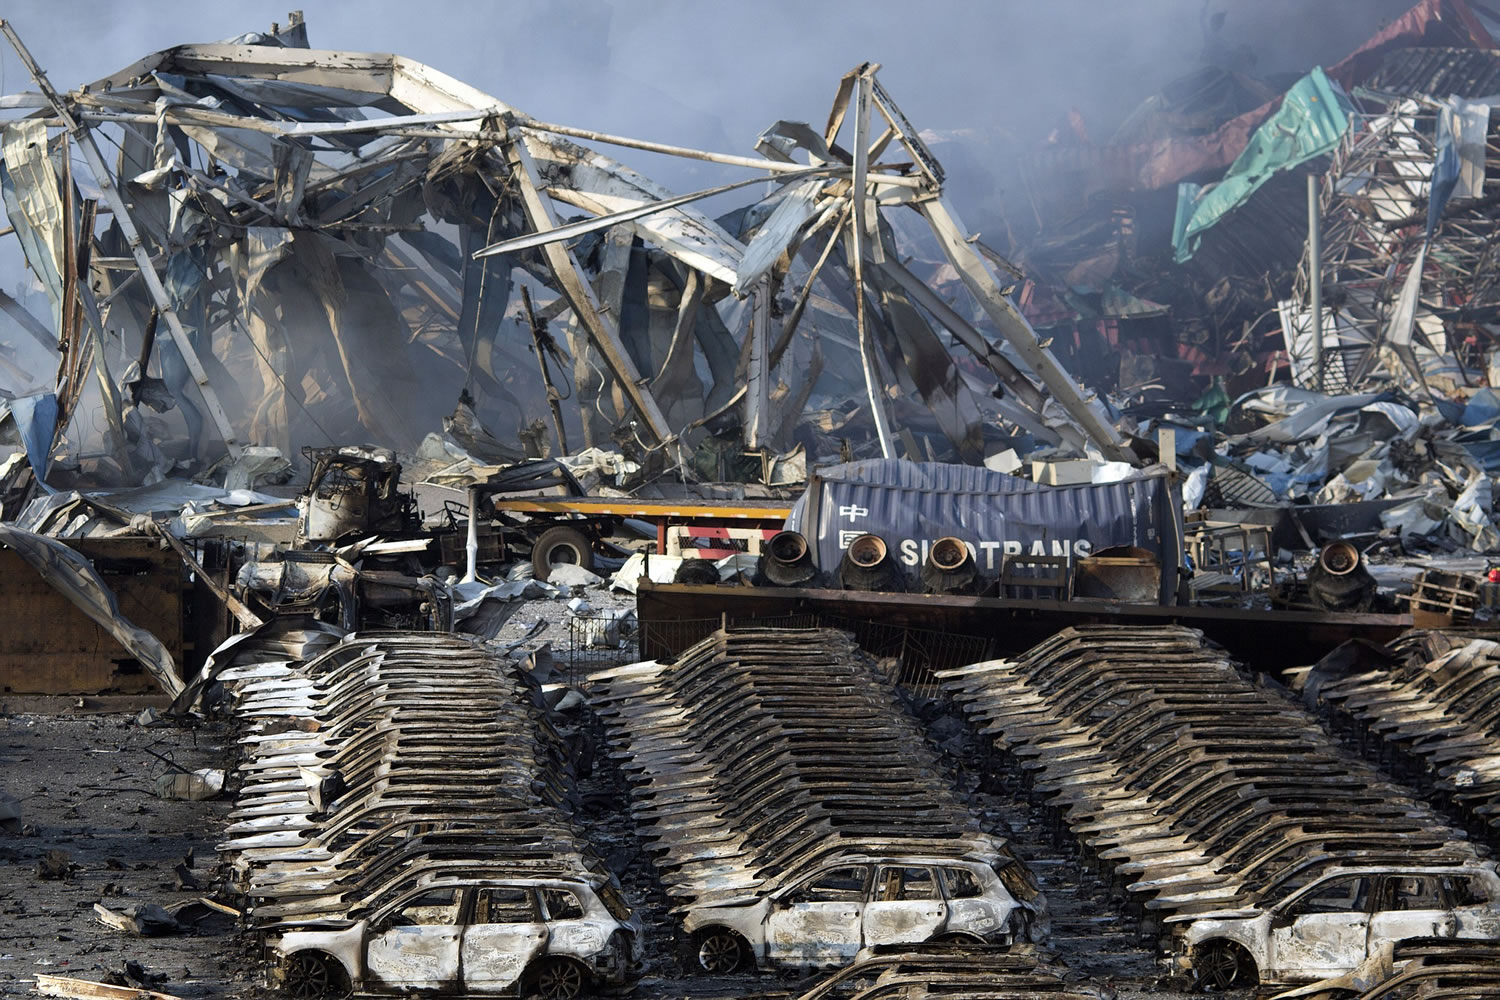 Charred remains of a warehouse and new cars are left burned after an explosion at a warehouse in northeastern China's Tianjin municipality, Thursday, Aug. 13, 2015. Huge, fiery blasts at a warehouse for hazardous chemicals killed many people and turned nearby buildings into skeletal shells in the Chinese port of Tianjin, raising questions Thursday about whether the materials had been properly stored.